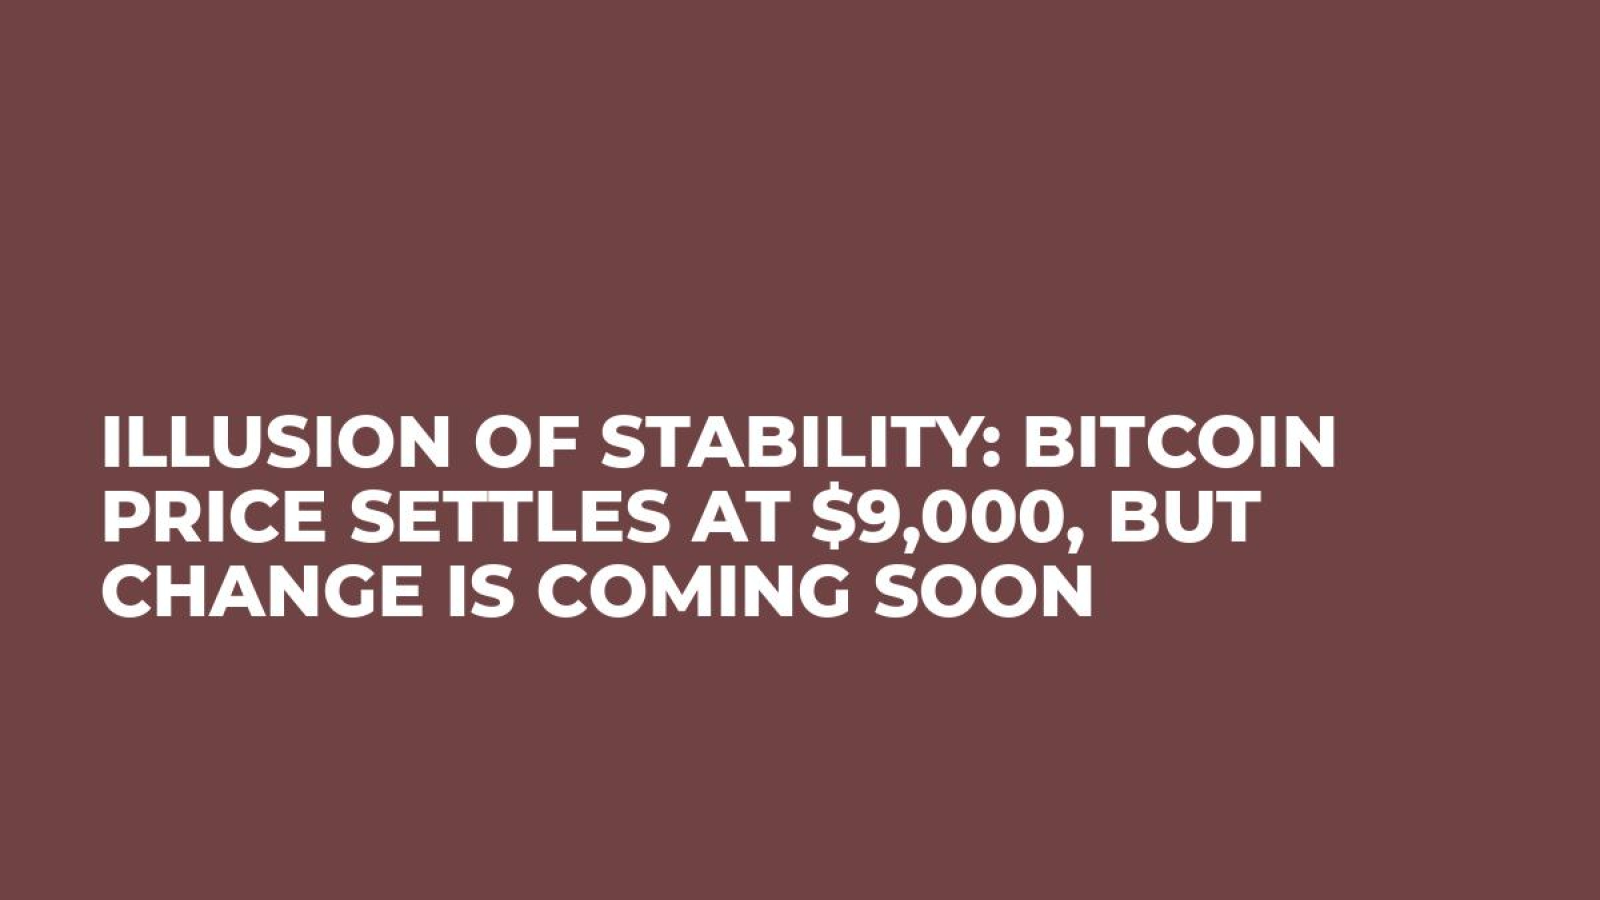 Illusion of Stability: Bitcoin Price Settles at $9,000, But Change is Coming Soon